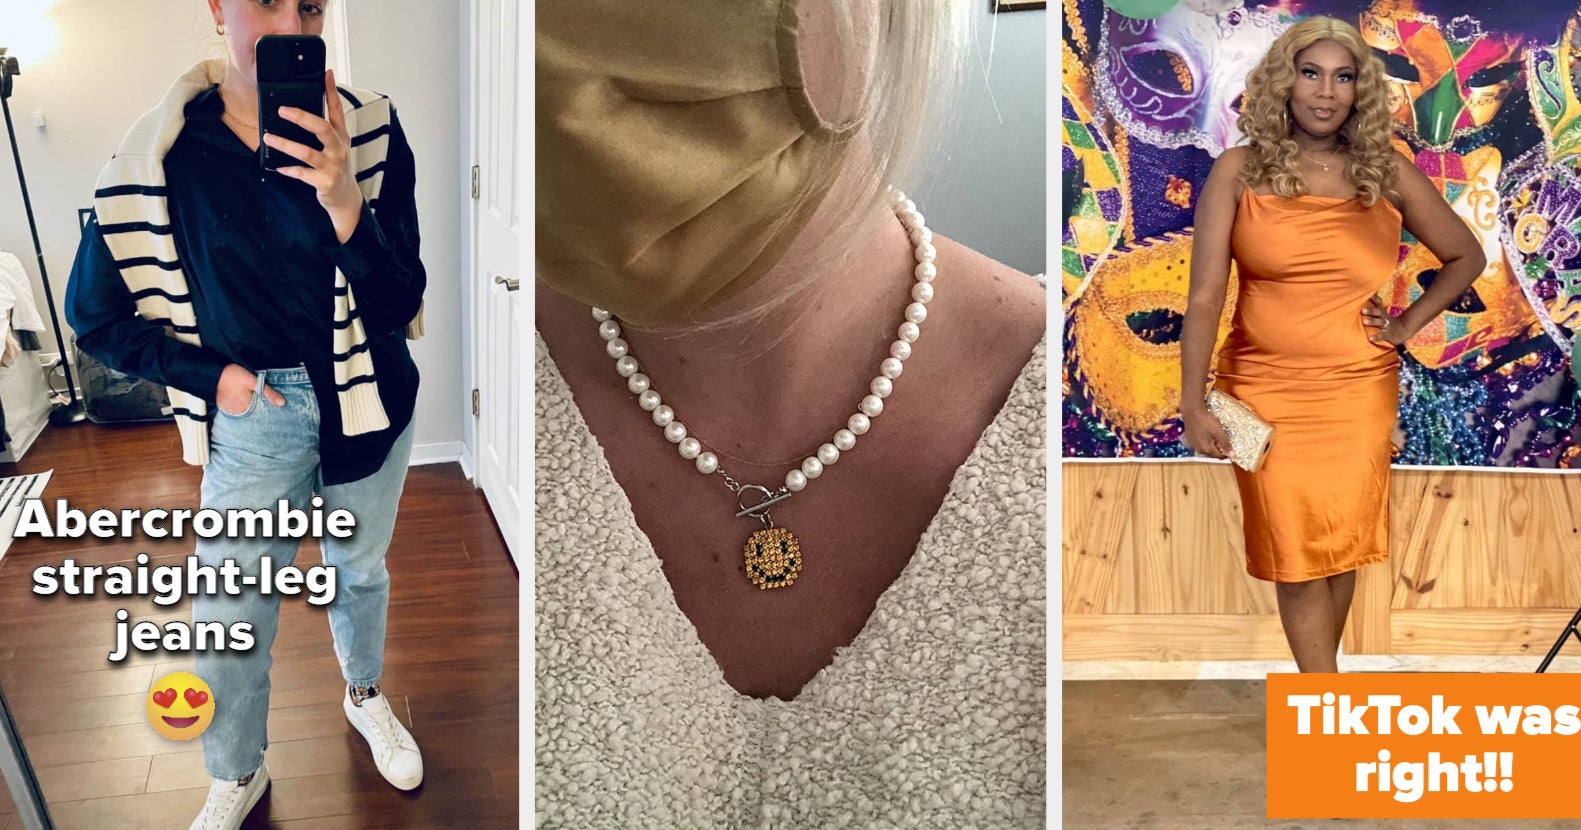 7 Trending Fashion Items on TikTok You Can Shop at